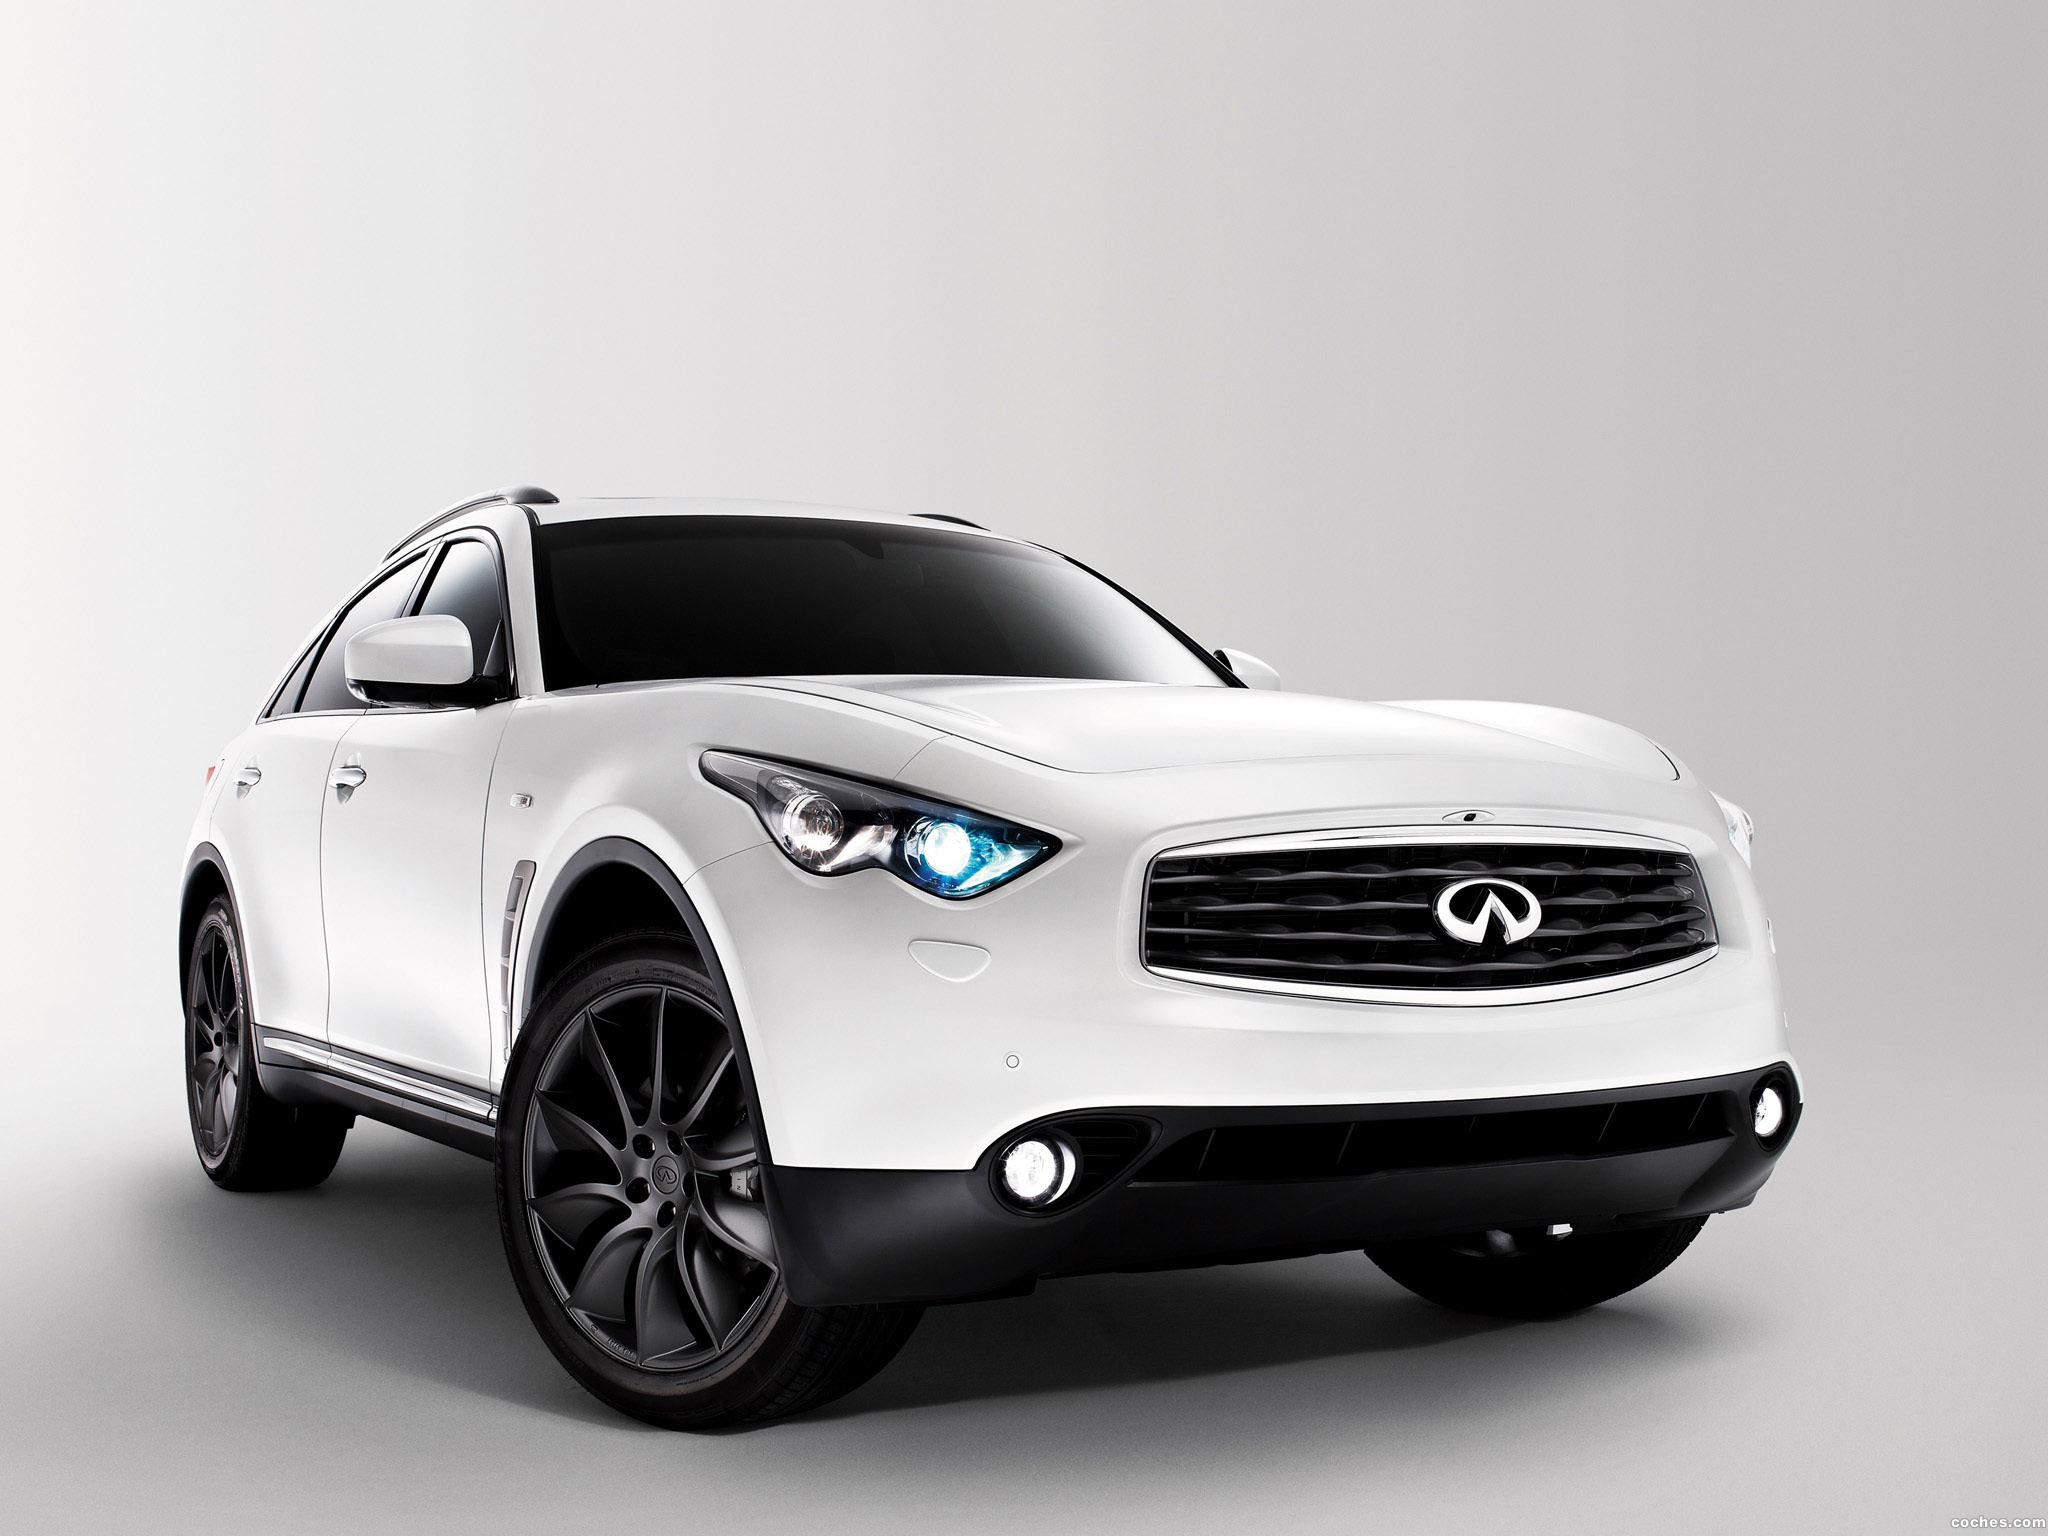 infiniti_fx50-s-limited-edition-2010_r6